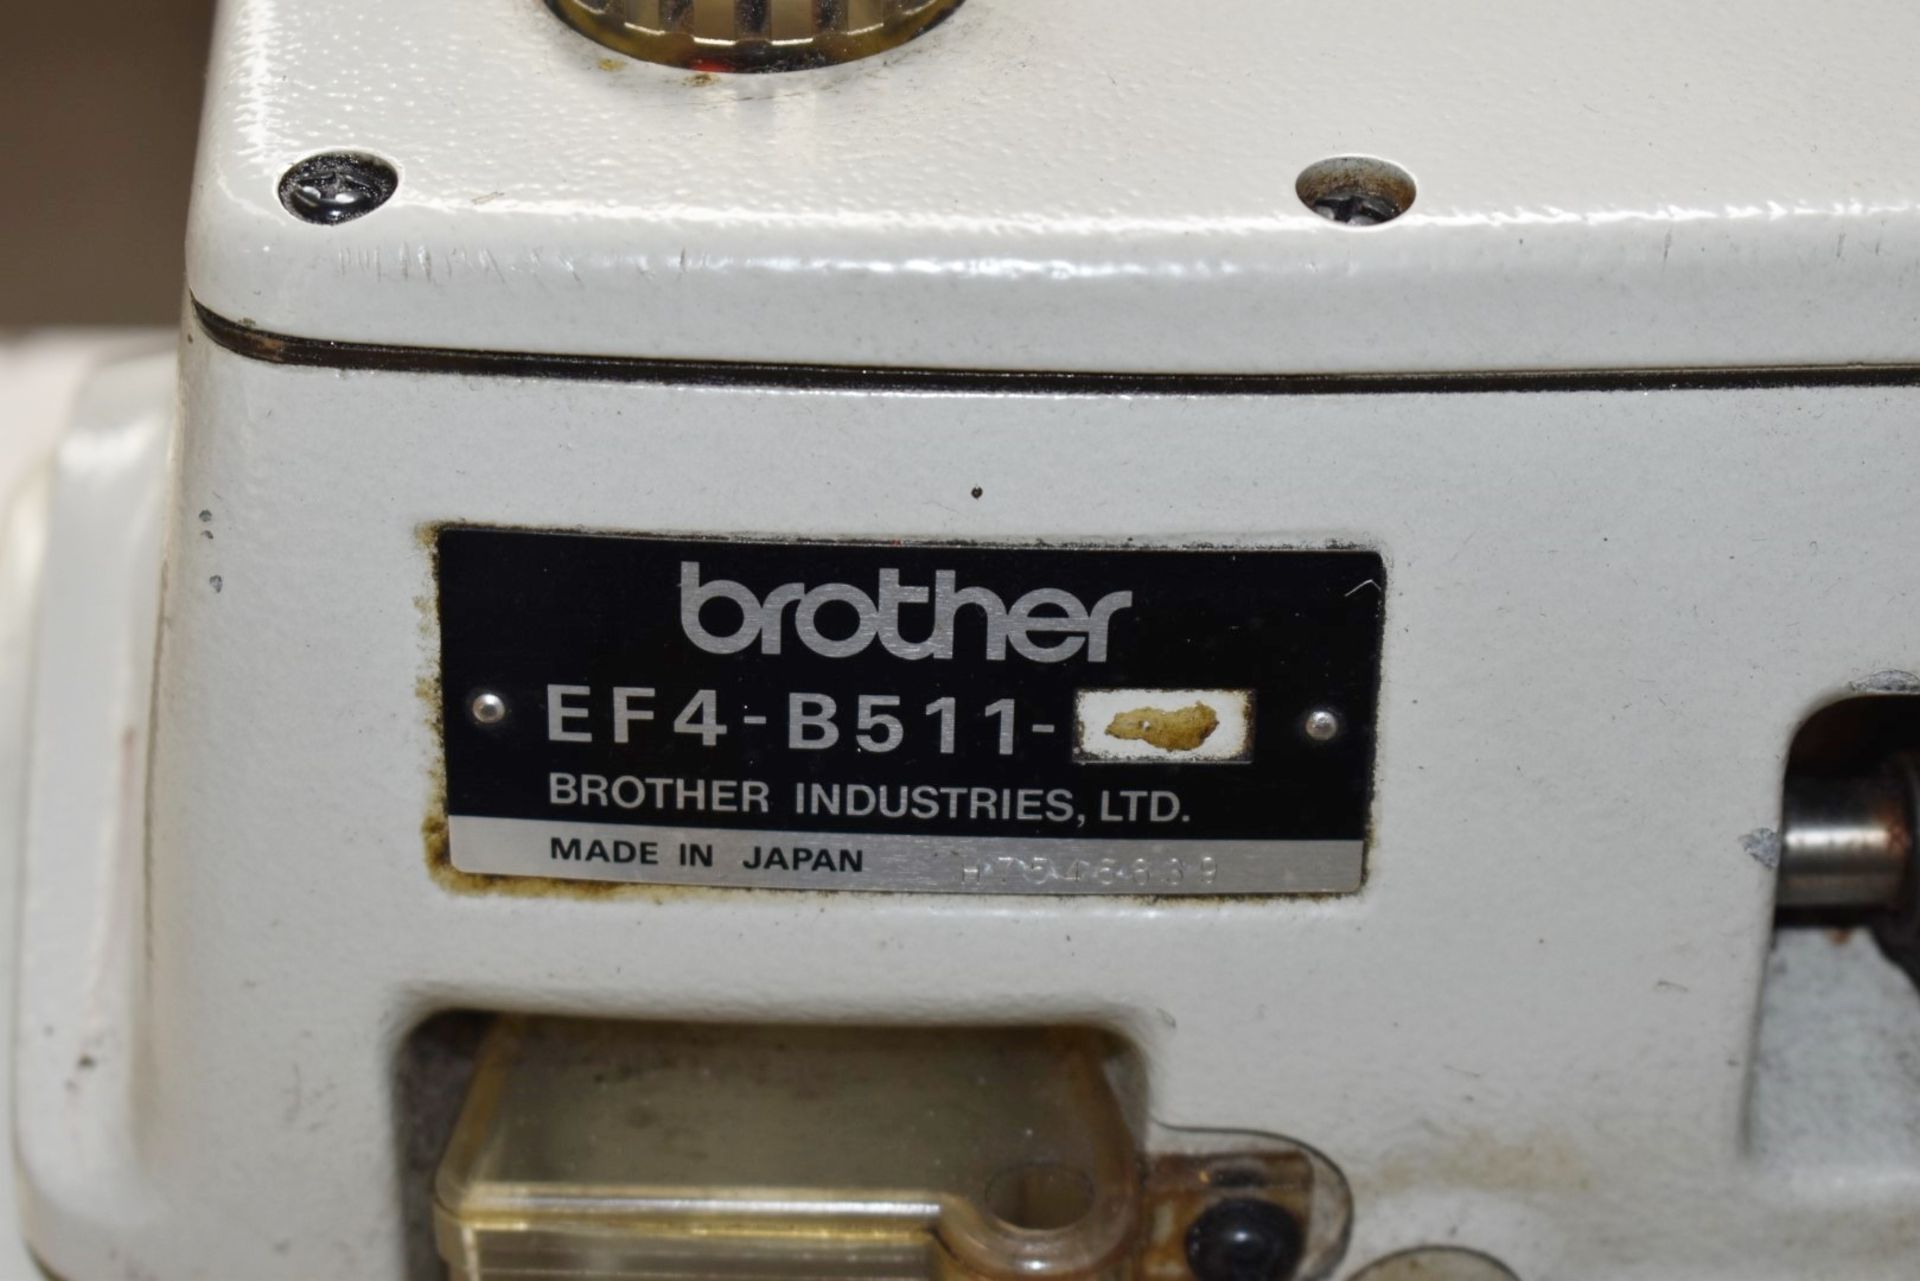 1 x Brother 3 Thread Overlock Industrial Sewing Machine - Model EF4-B511 - Image 17 of 27